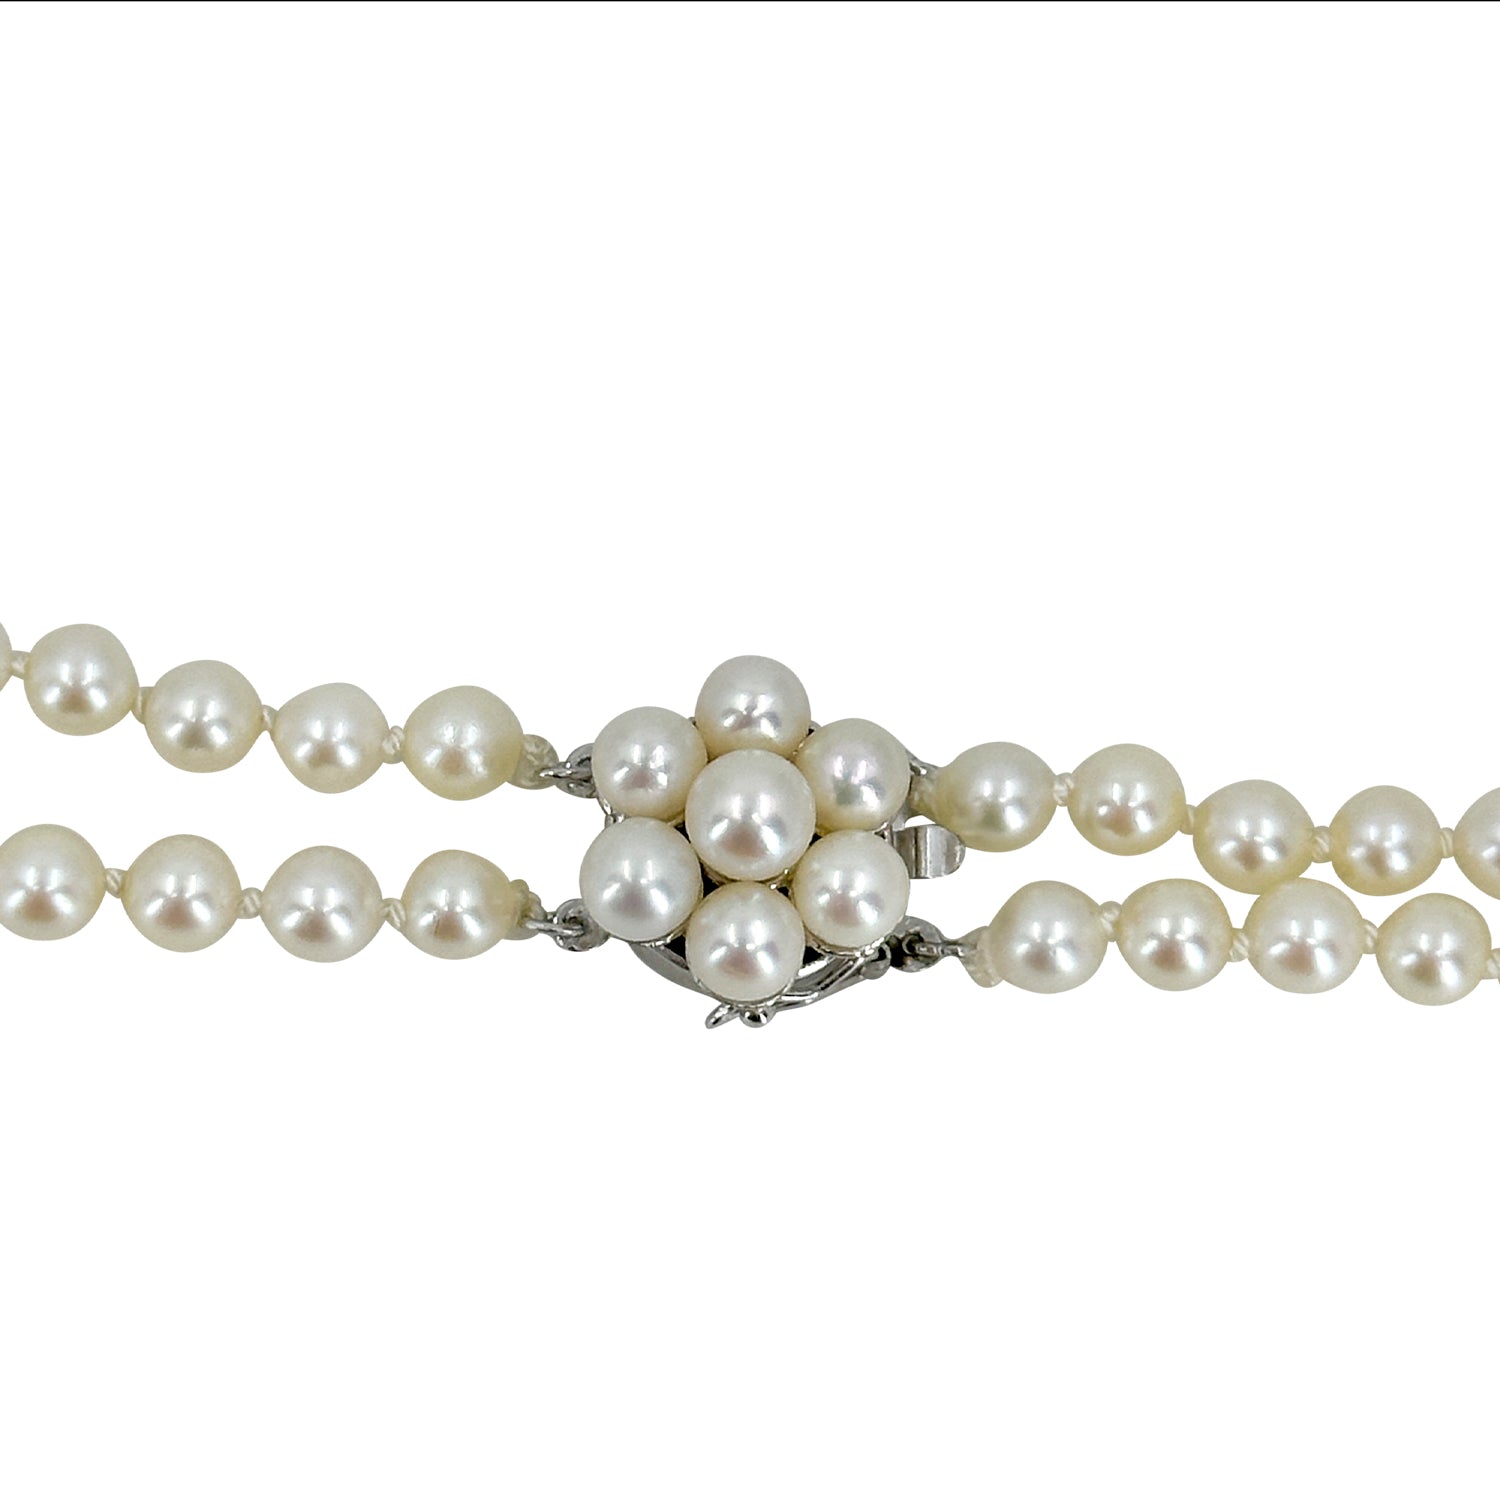 Petite Double Strand Japanese Saltwater Akoya Cultured Pearl Vintage Necklace - 14K White Gold 16.50 & 17 Inc